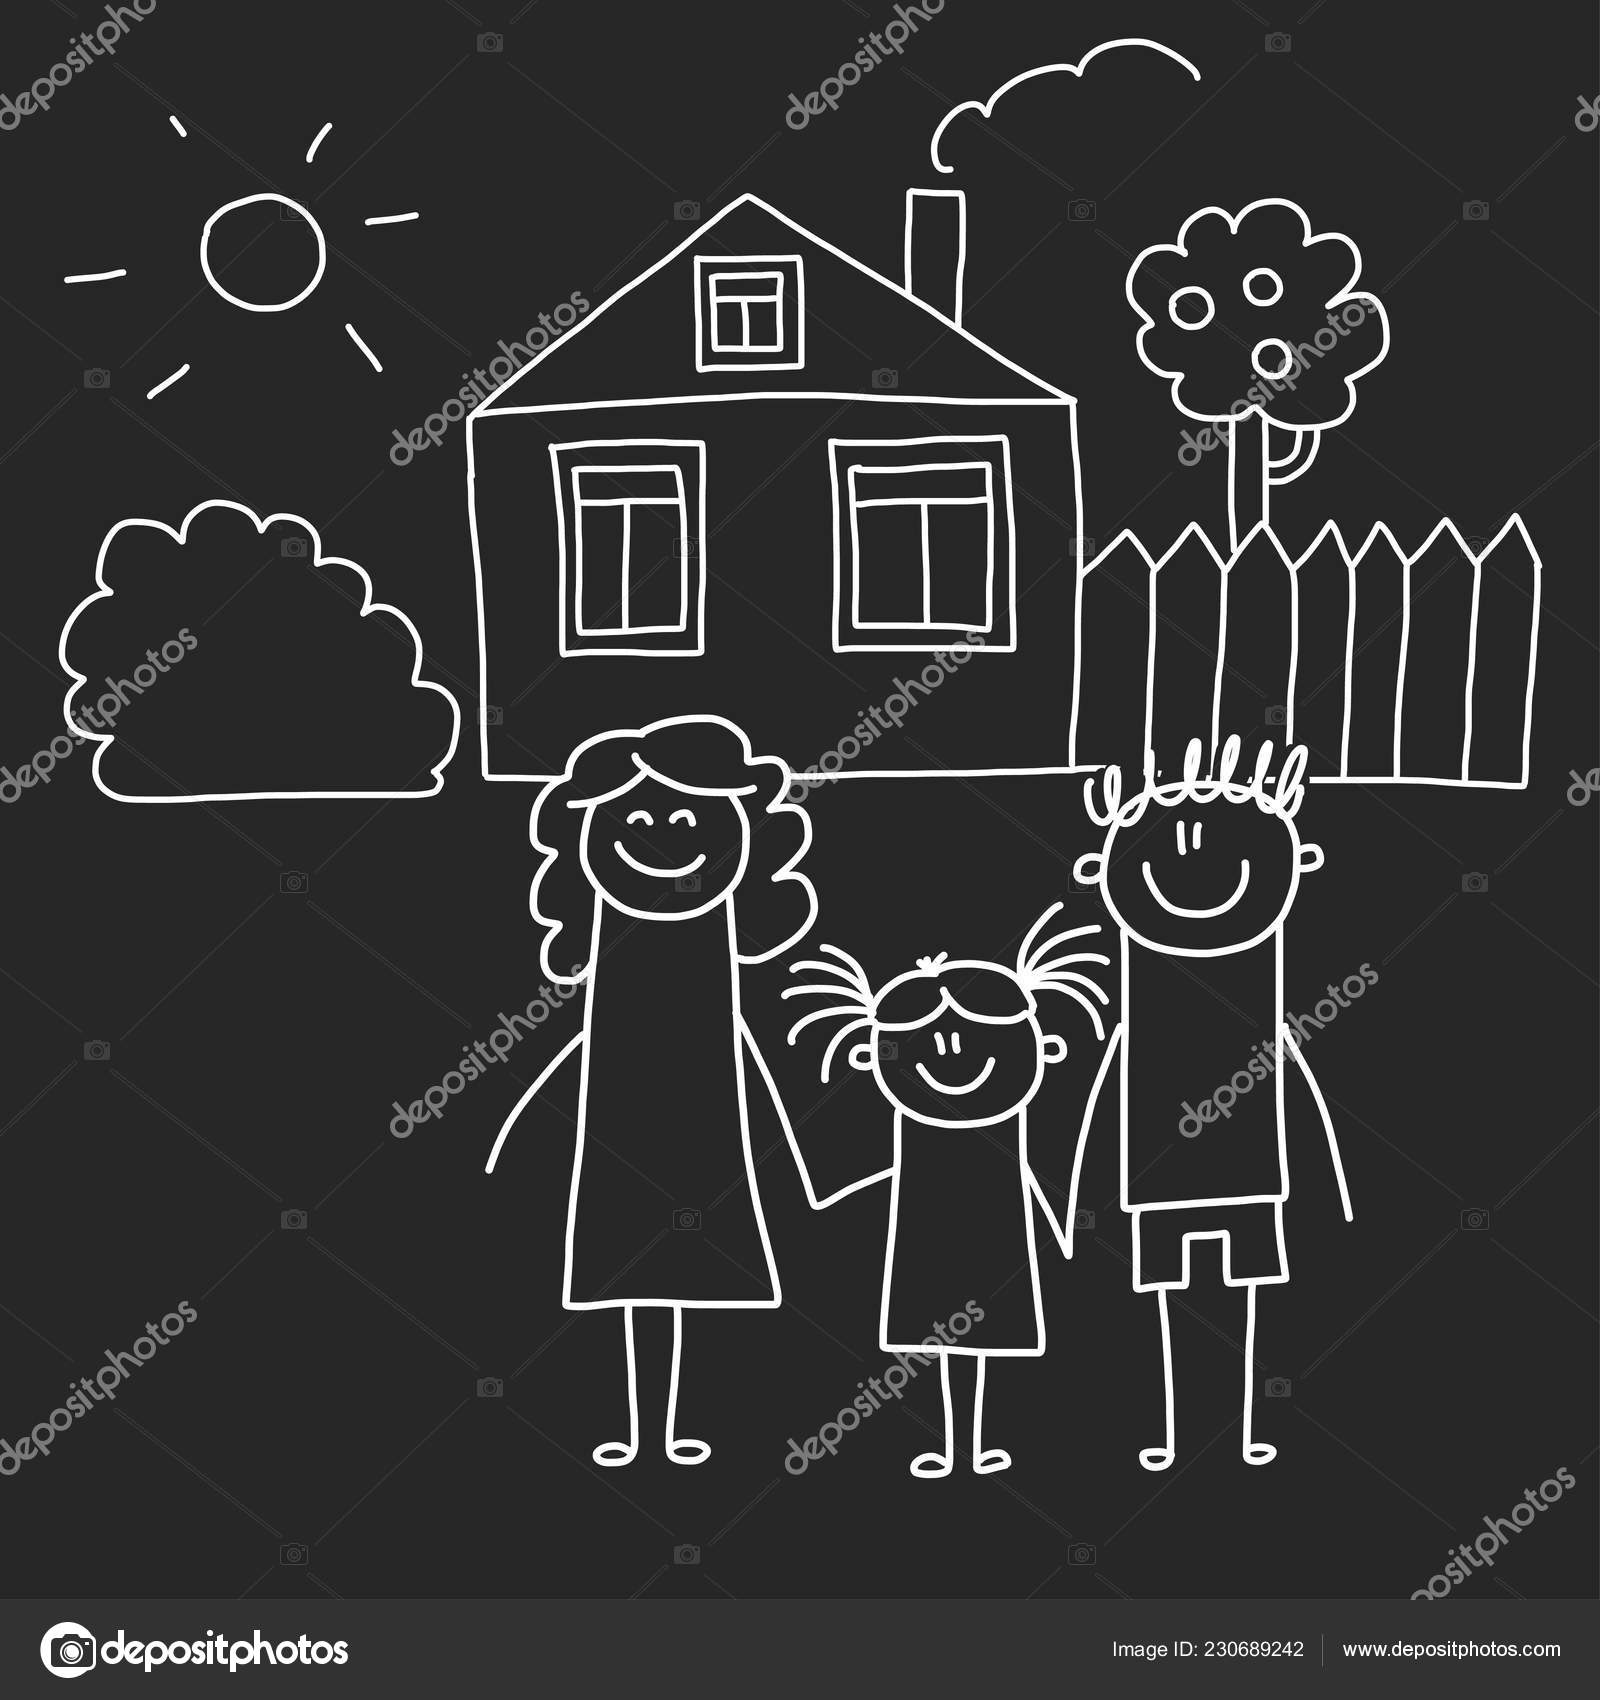 Family House Pencil Sketch Vector Images (over 100)